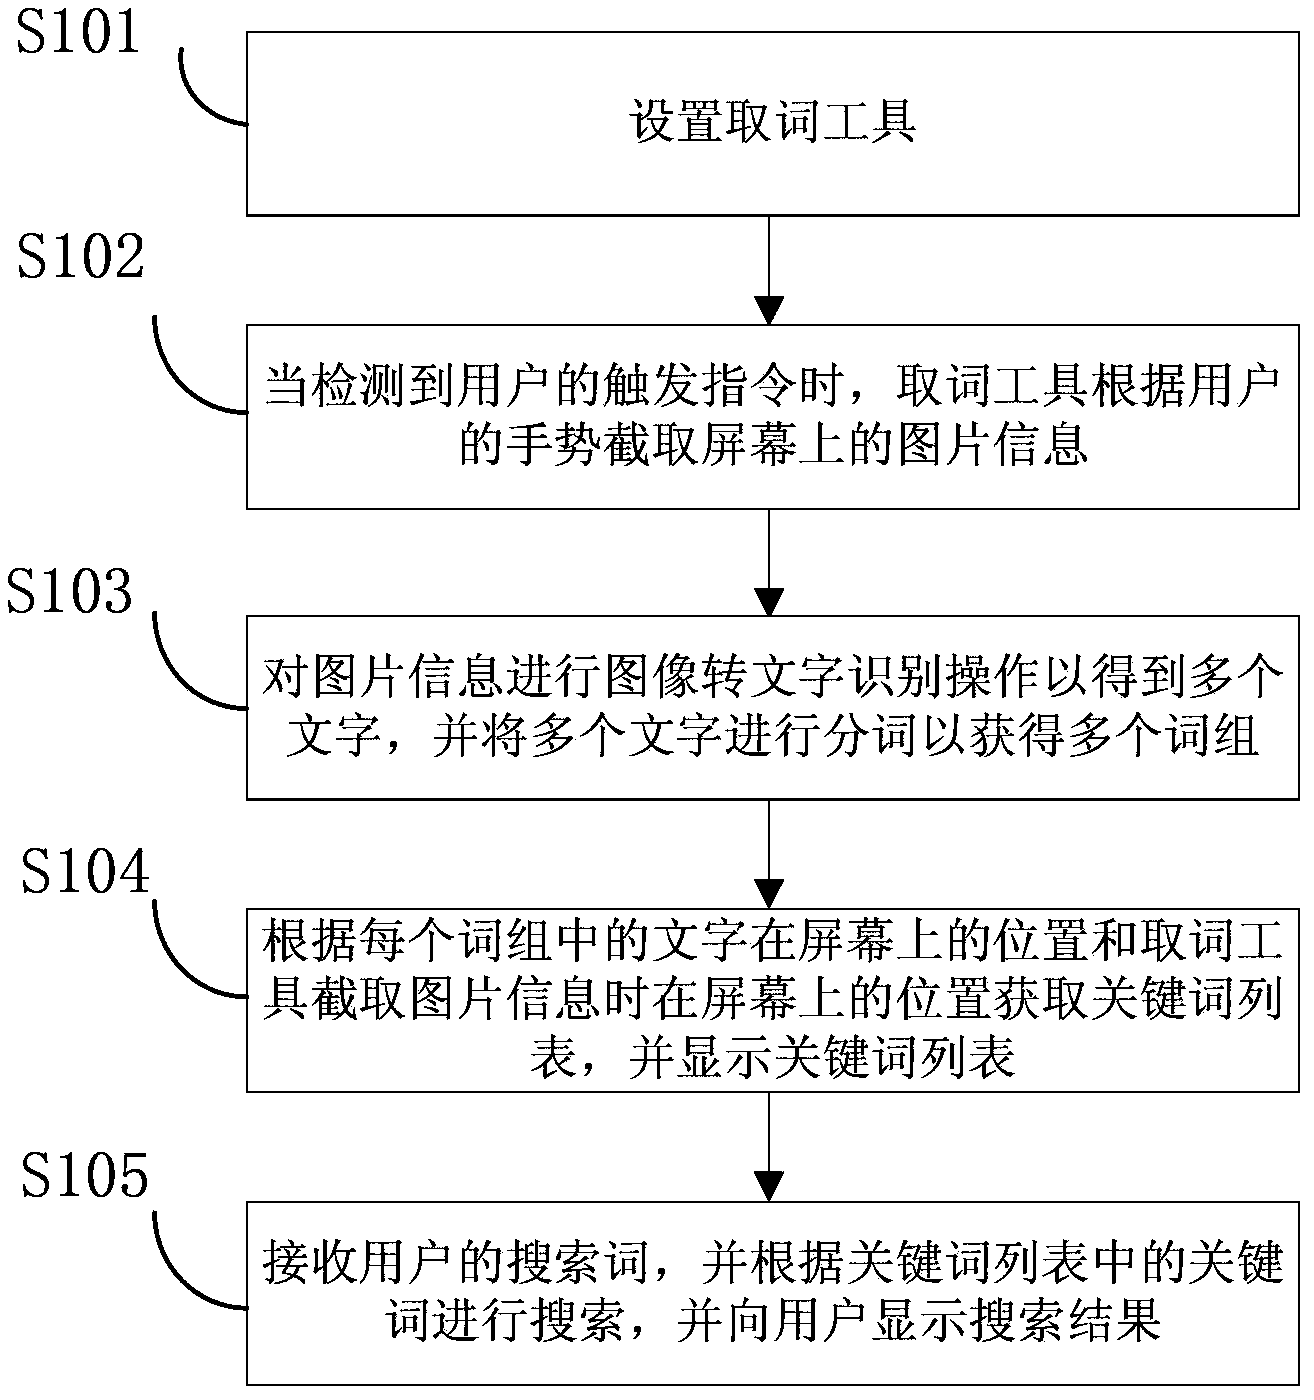 Method for searching for characters displayed in screen and based on mobile terminal and mobile terminal